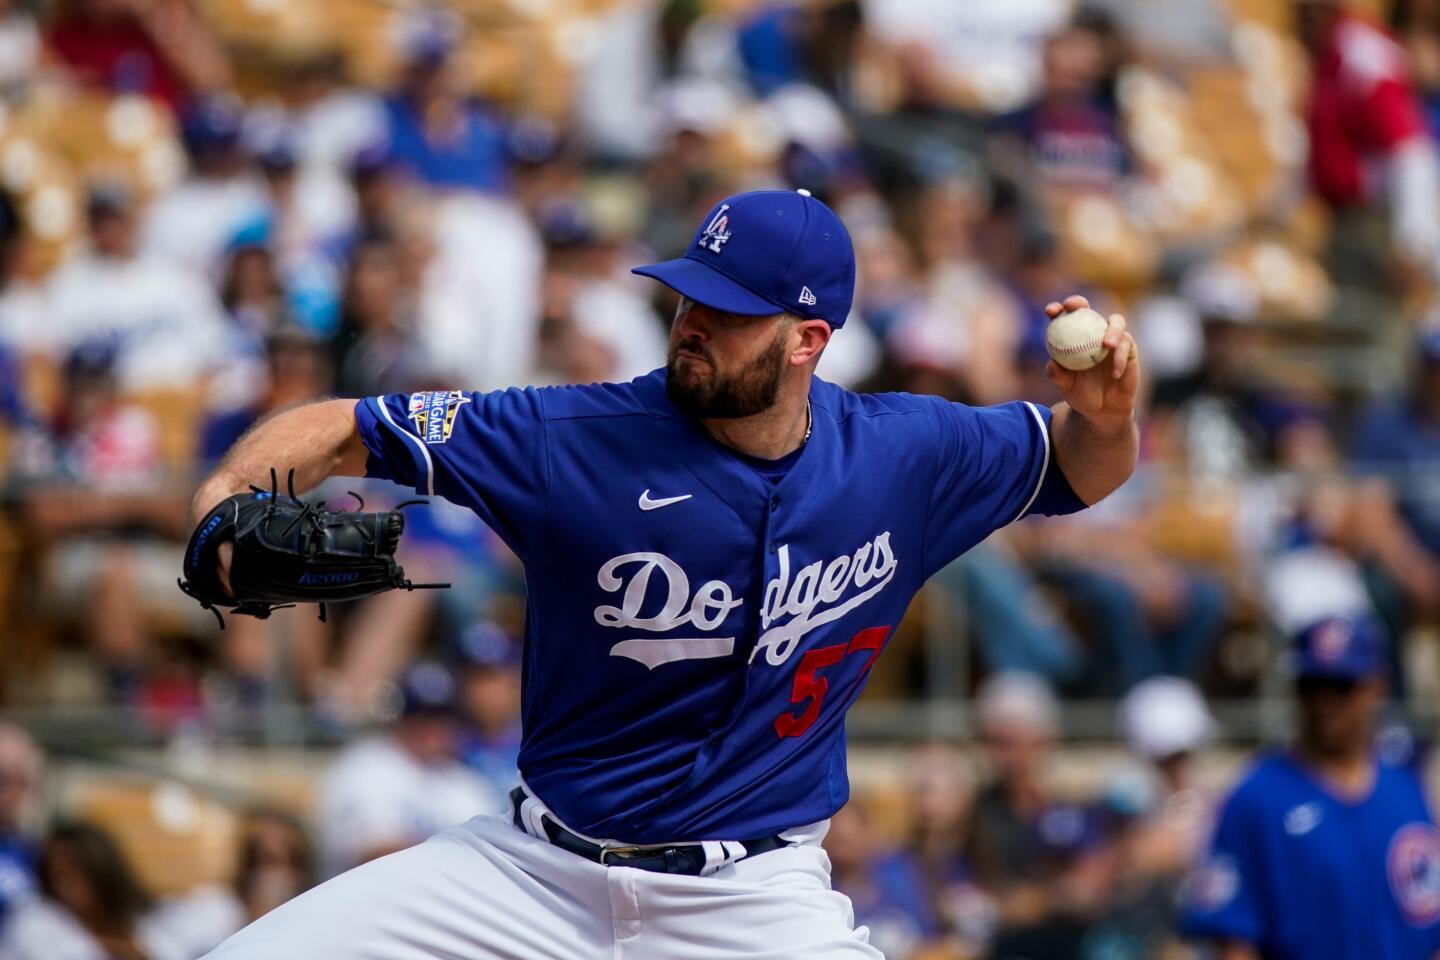 Dodgers starting pitcher Alex Wood delivers during a spring training exhibition game against the Chicago Cubs at Camelback Ranch on Feb. 23, 2020.